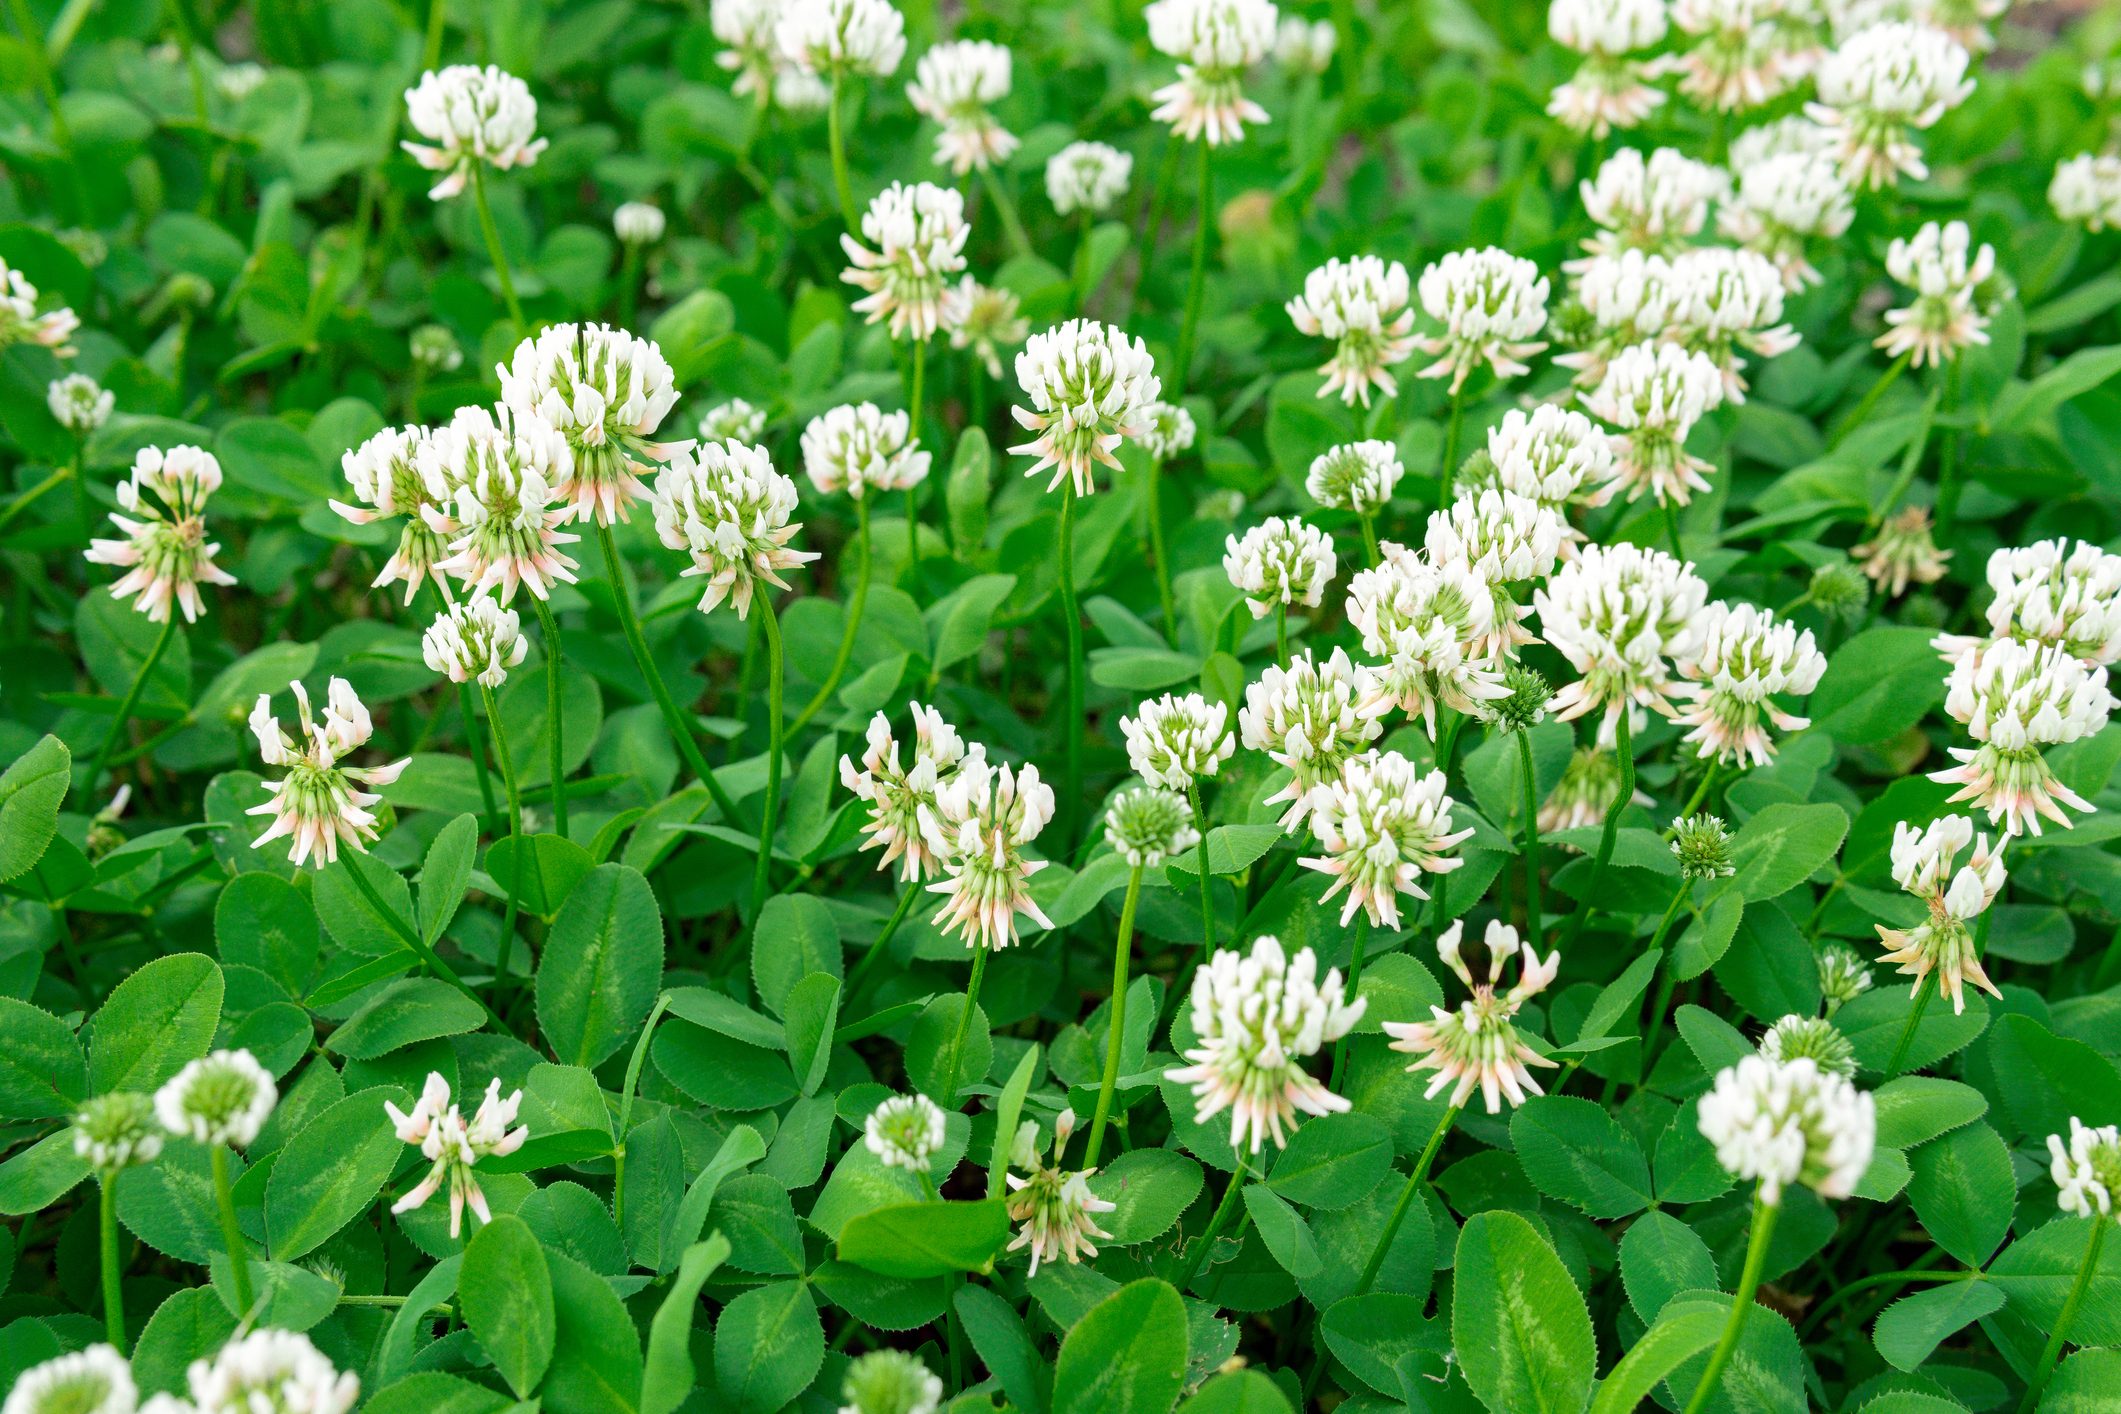 How to Get Rid of Clover in Lawn